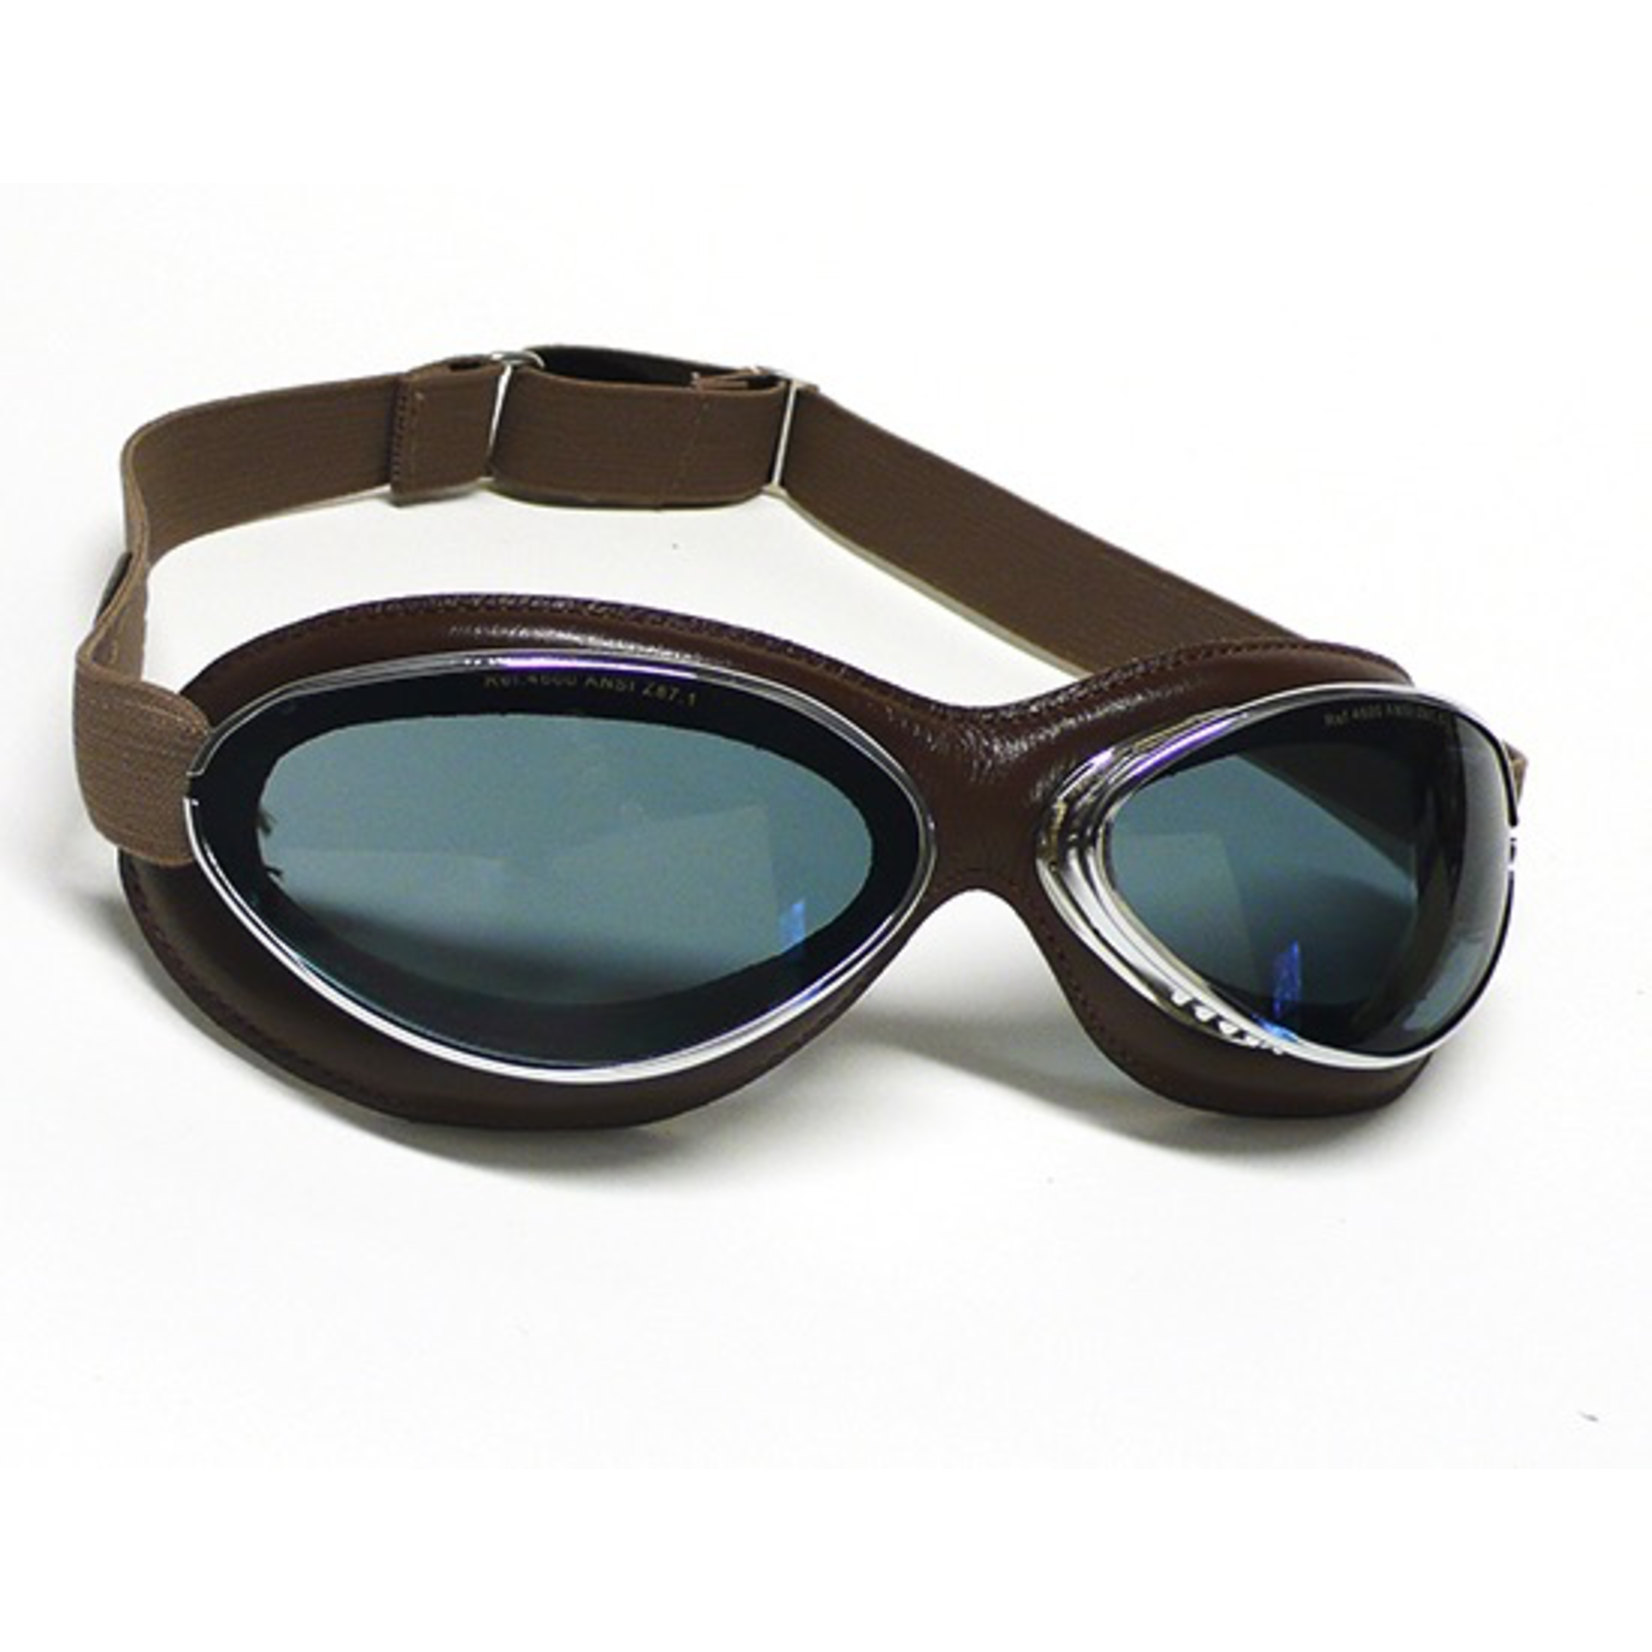 Apparel Goggles, Aviator Chrome Brown Leather (France)